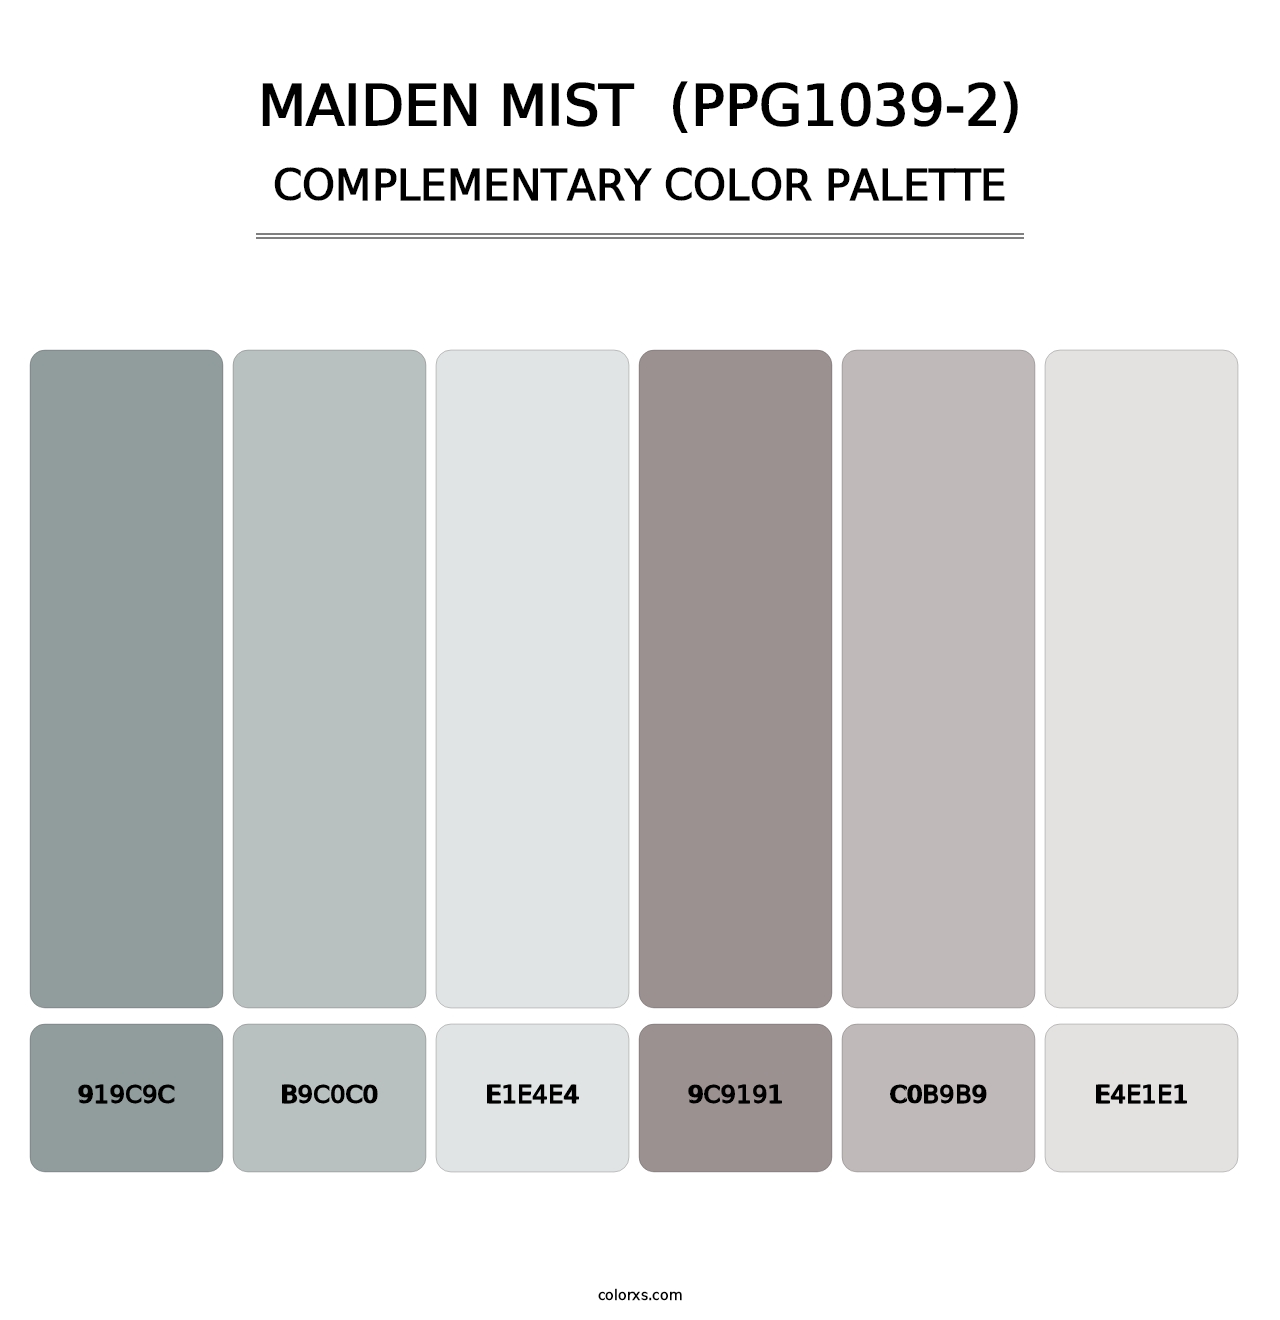 Maiden Mist  (PPG1039-2) - Complementary Color Palette